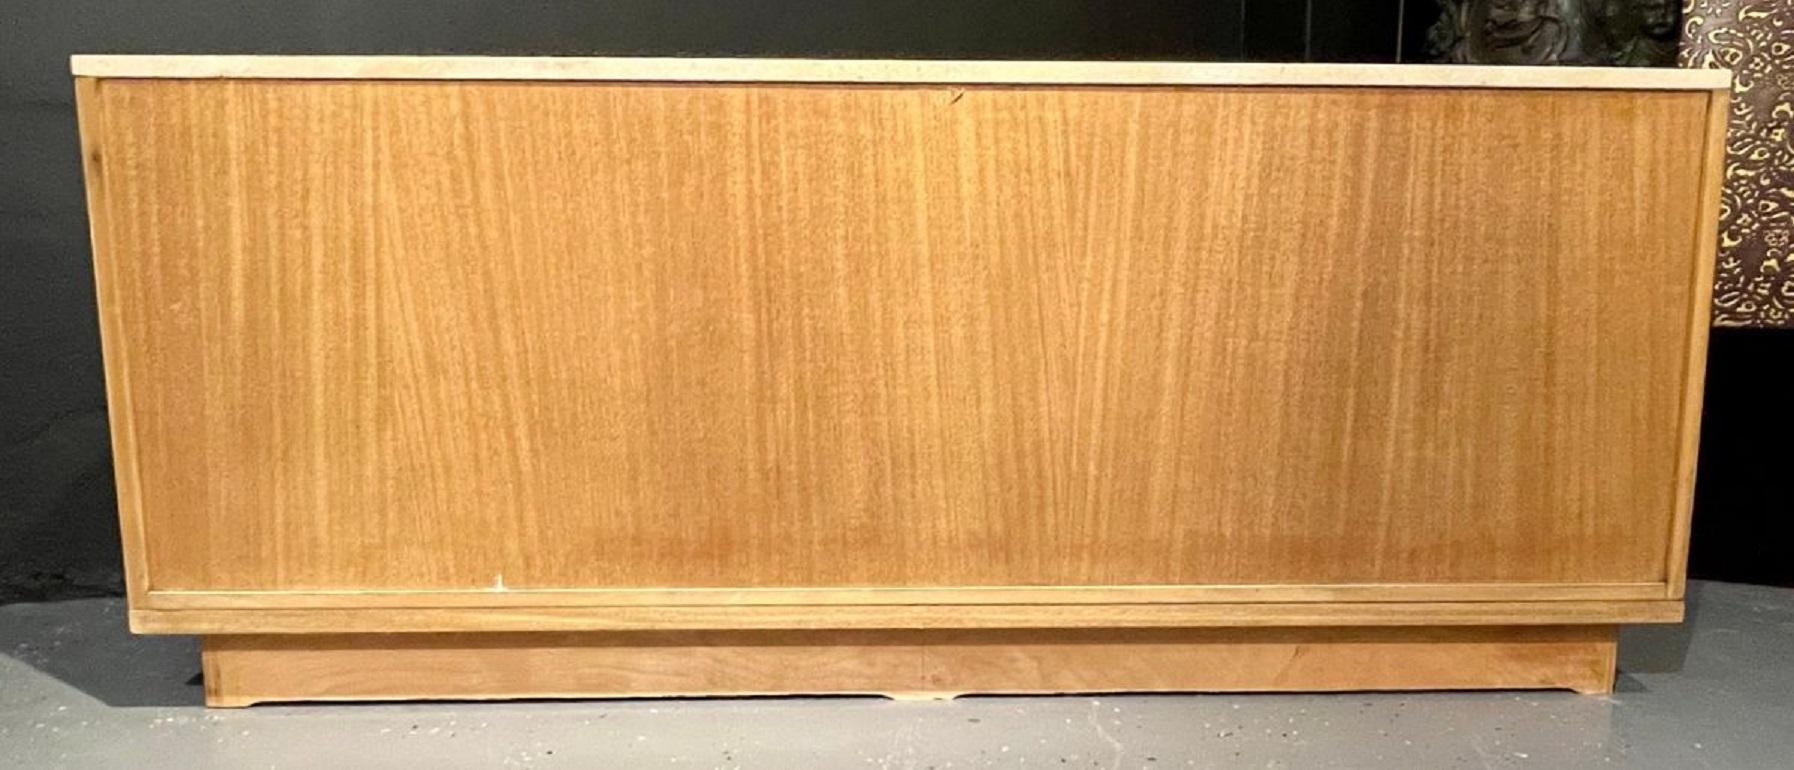 Mid-Century Modern Sideboard by Paul McCobb Credenza, Irwin Collection For Sale 12